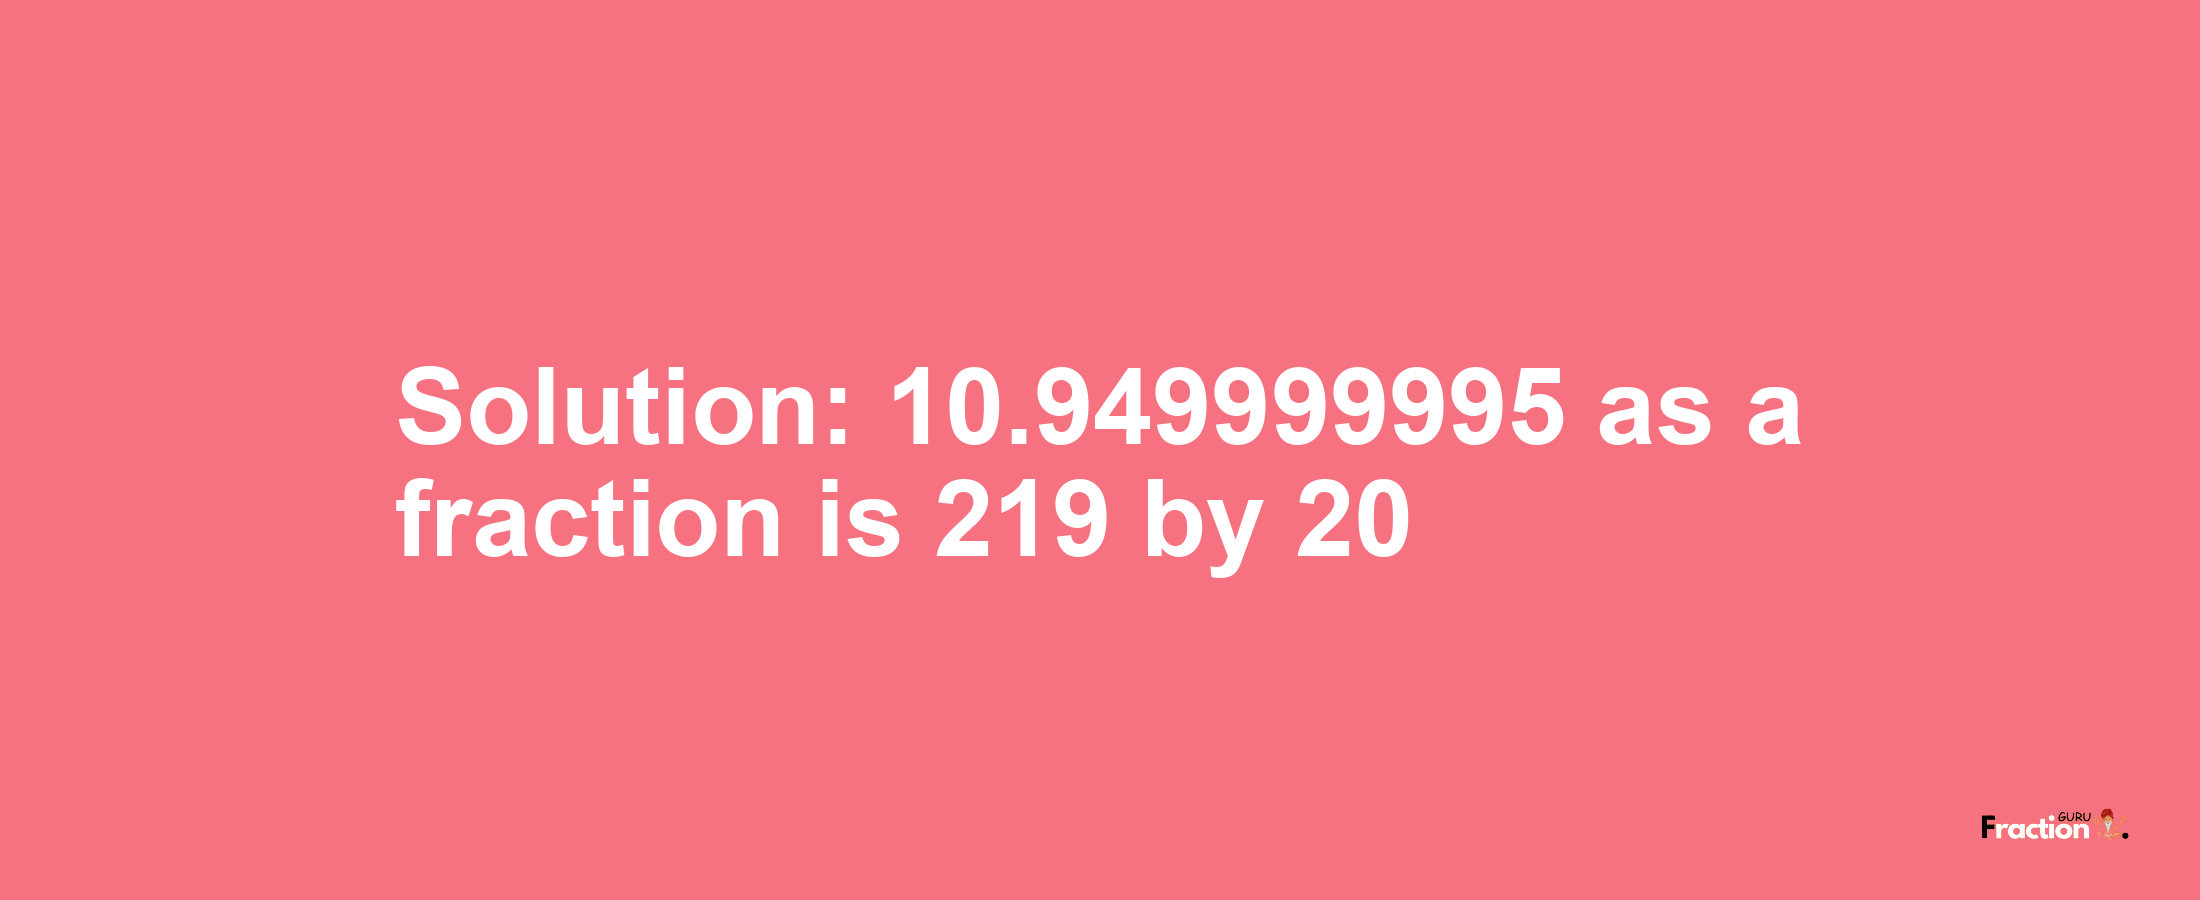 Solution:10.949999995 as a fraction is 219/20